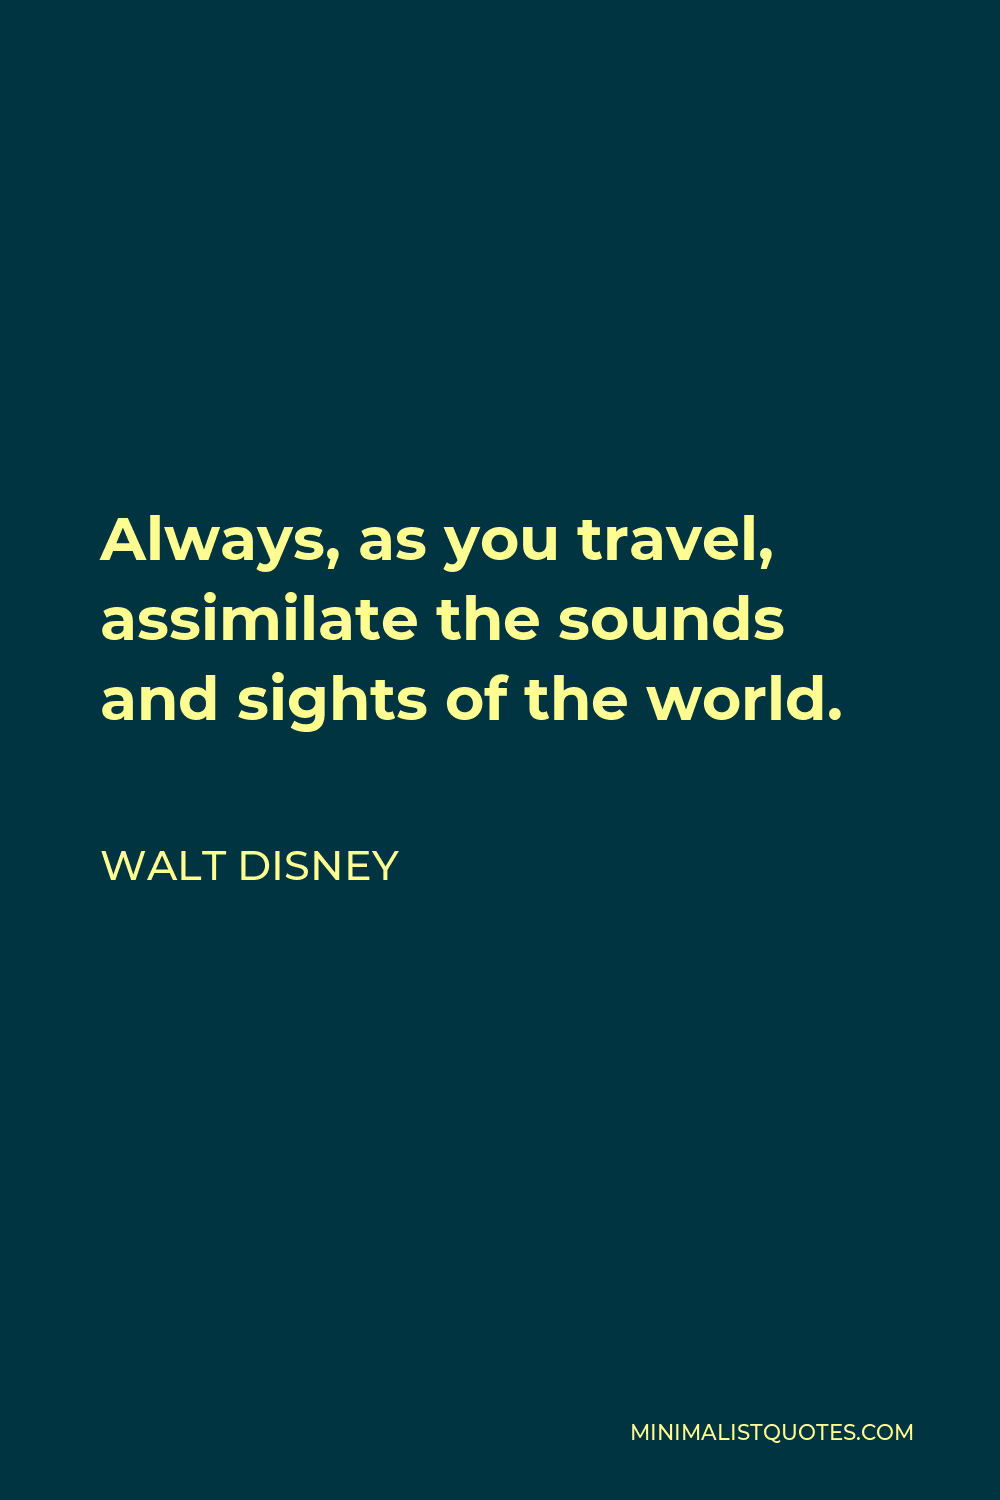 Walt Disney Quote - Always, as you travel, assimilate the sounds and sights of the world.